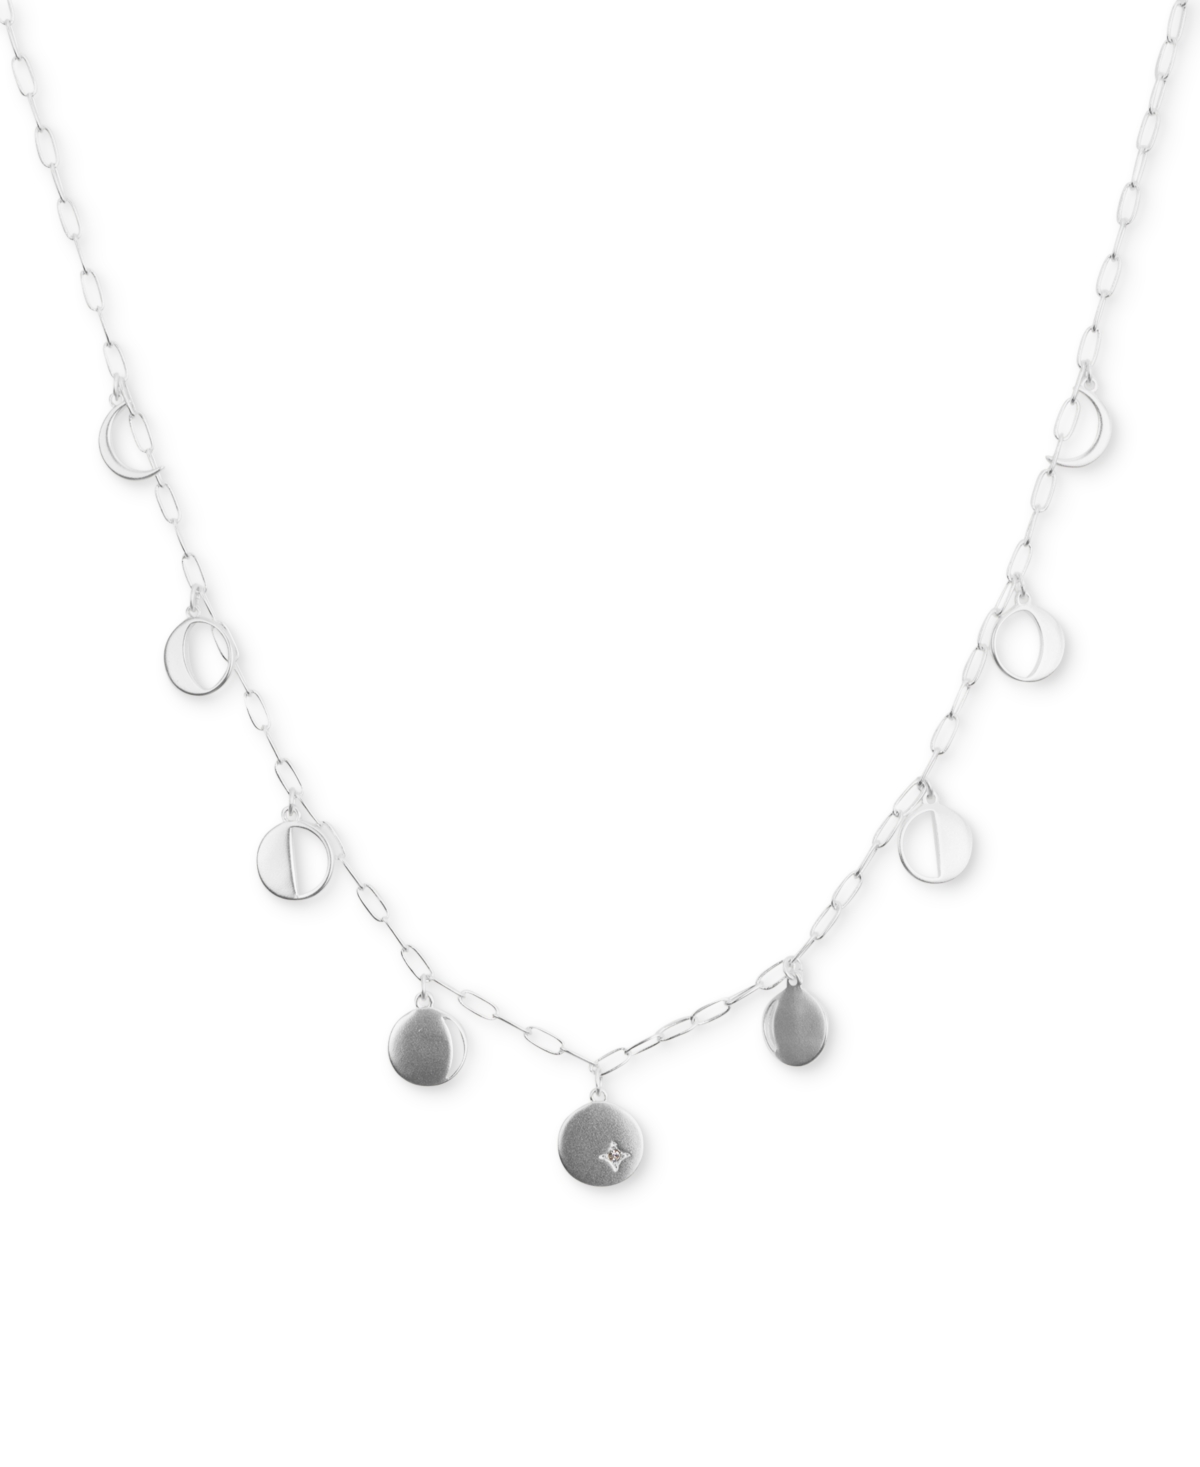 Lucky Brand Silver-tone Pave Star Moon Phase Charm Statement Necklace, 17" + 2" Extender